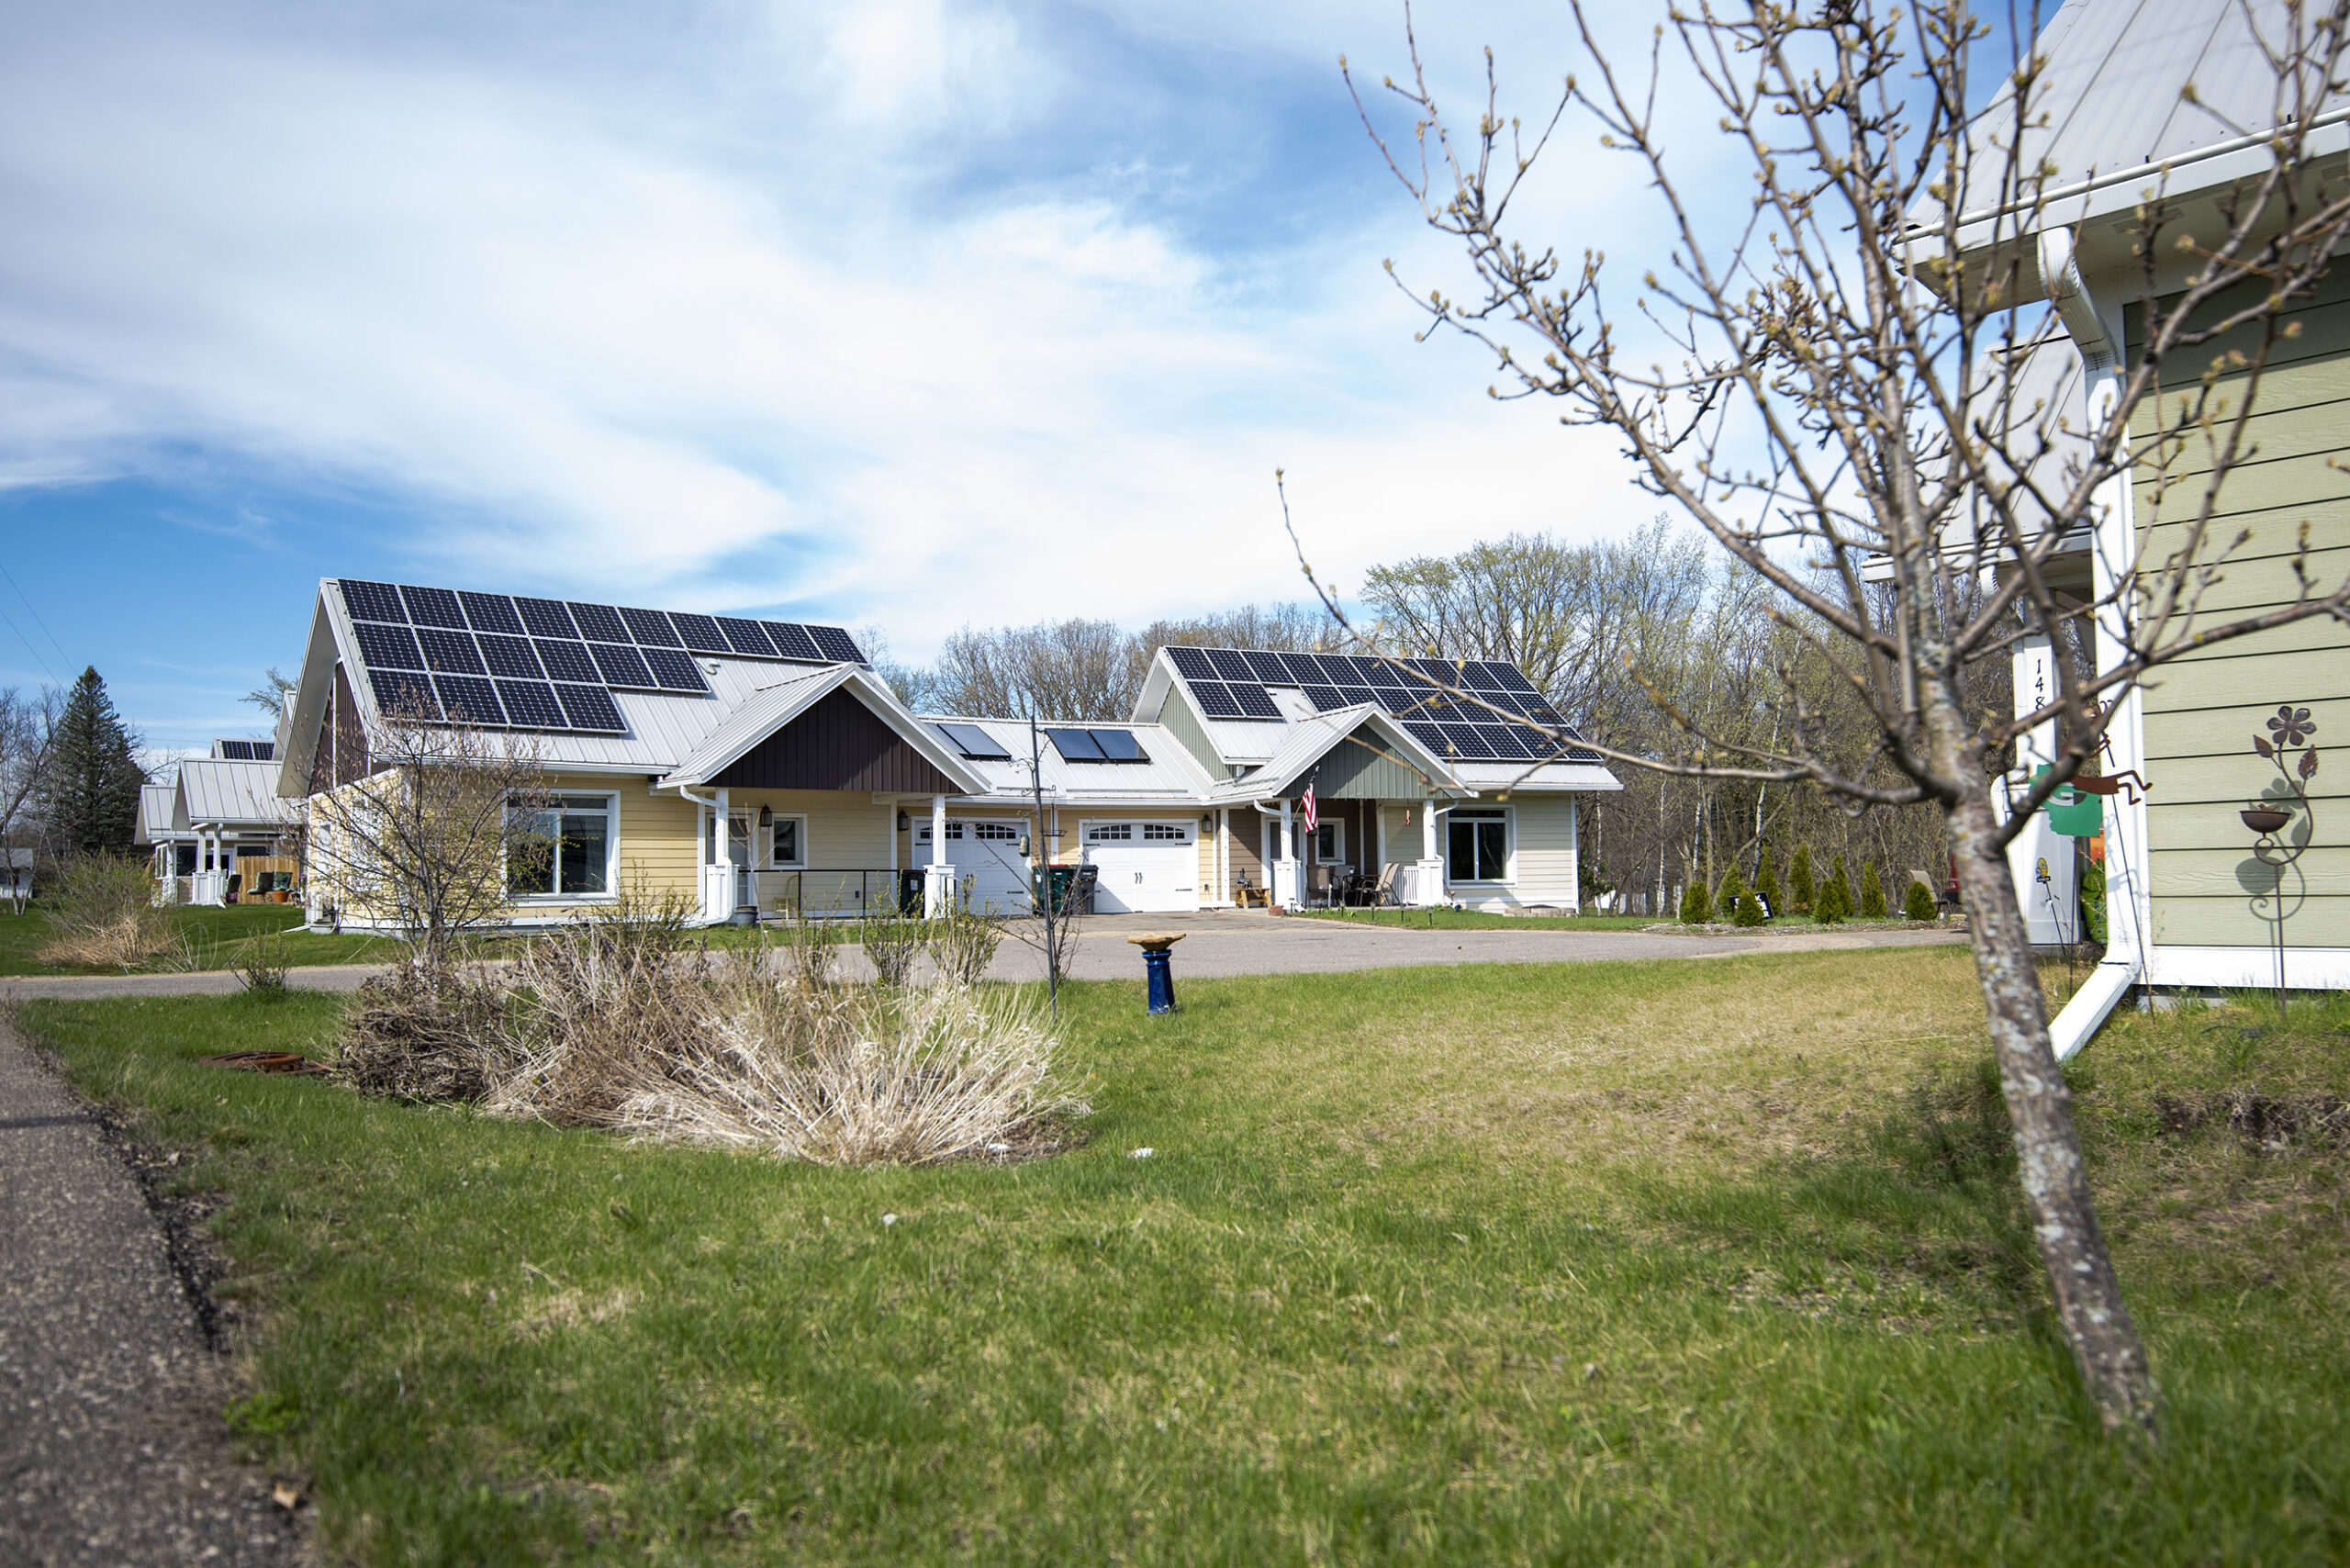 Wisconsinites interested in rooftop solar face more hurdles than those in other states